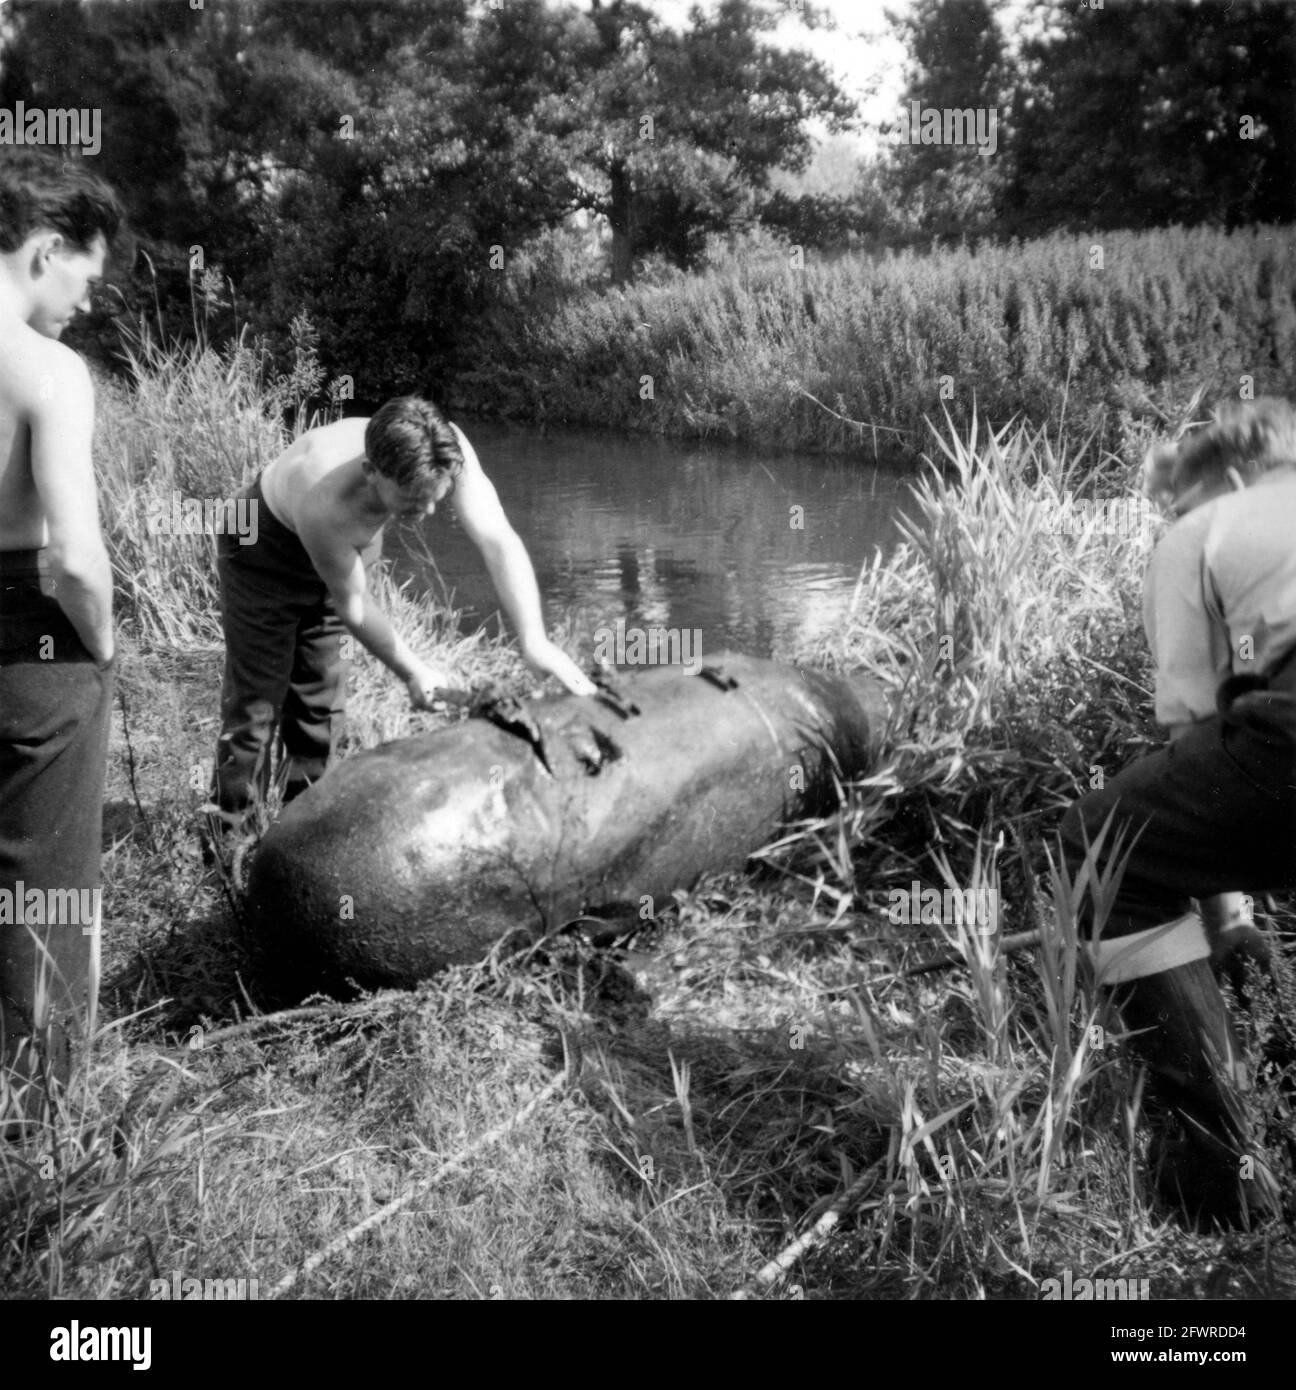 Members of the Royal Air Force bomb disposal unit dealing with Second World War ordnance, having extracted it from a river. 1950s/60s Stock Photo